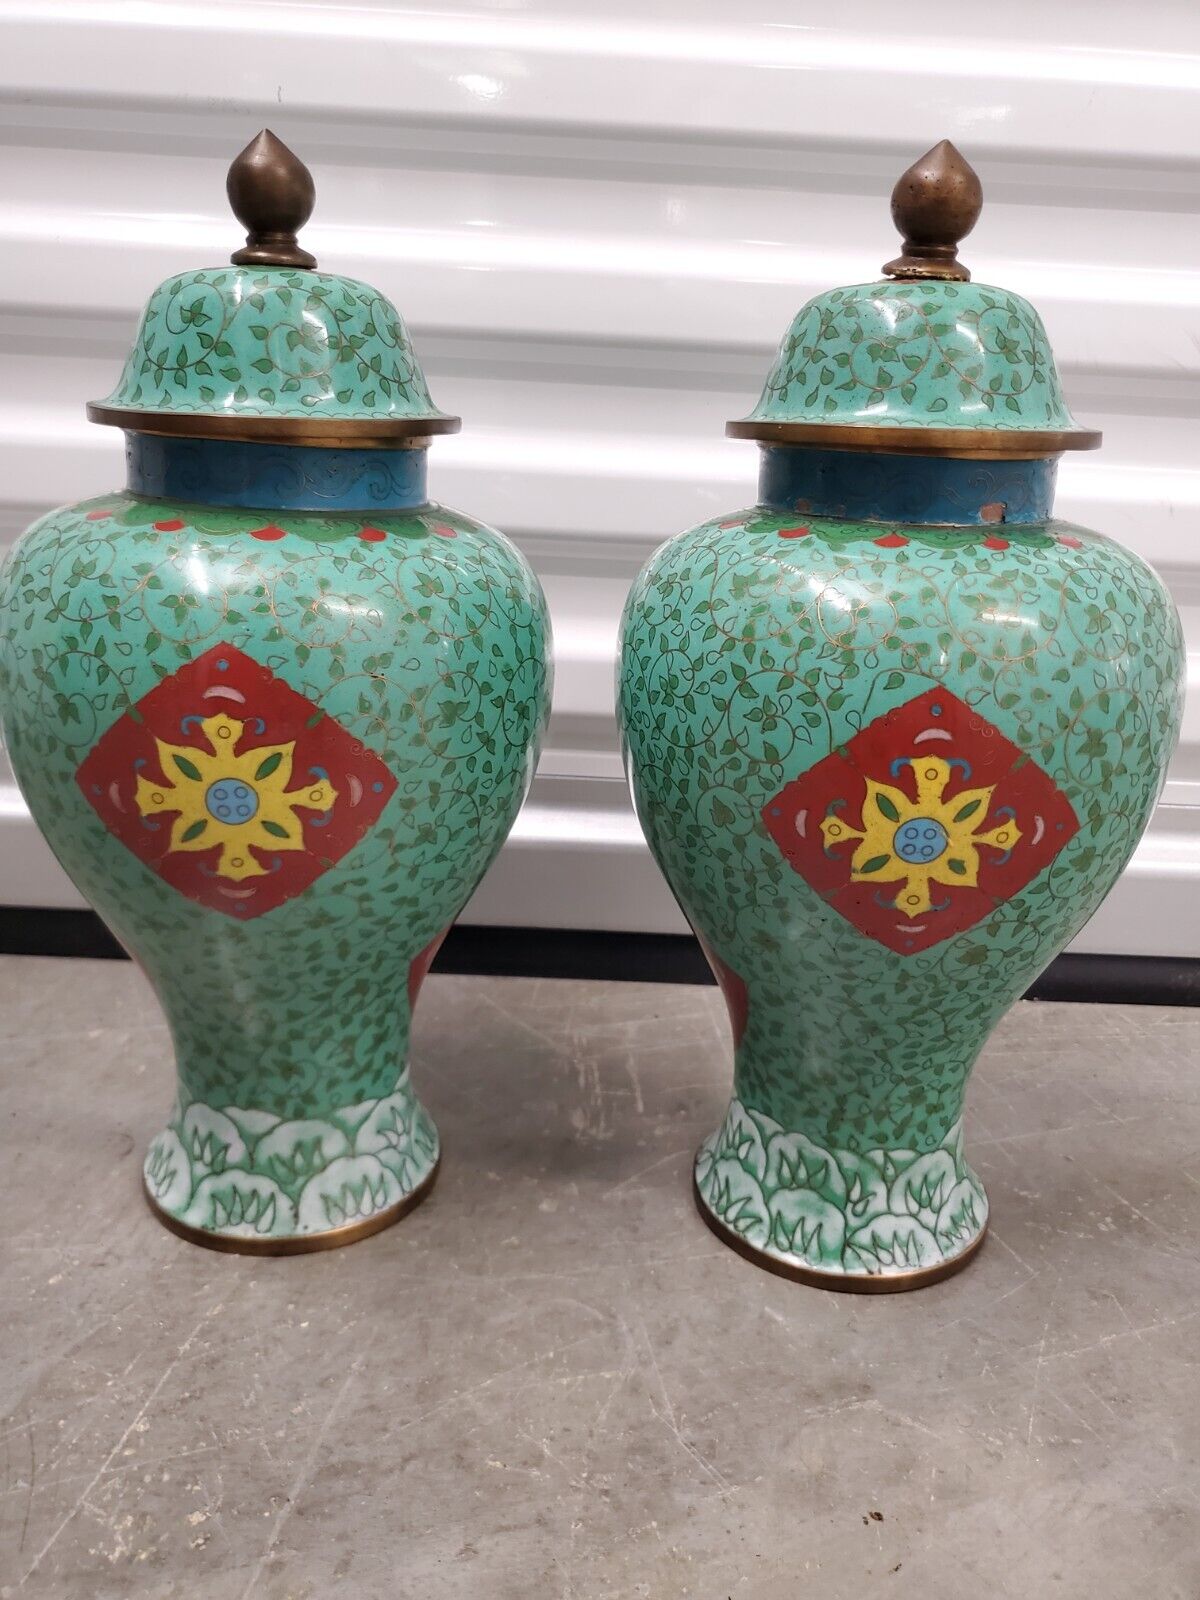 Rare 14inch Pair of Armorial Republic Period Chinese Cloisonne Ginger Jars Urns